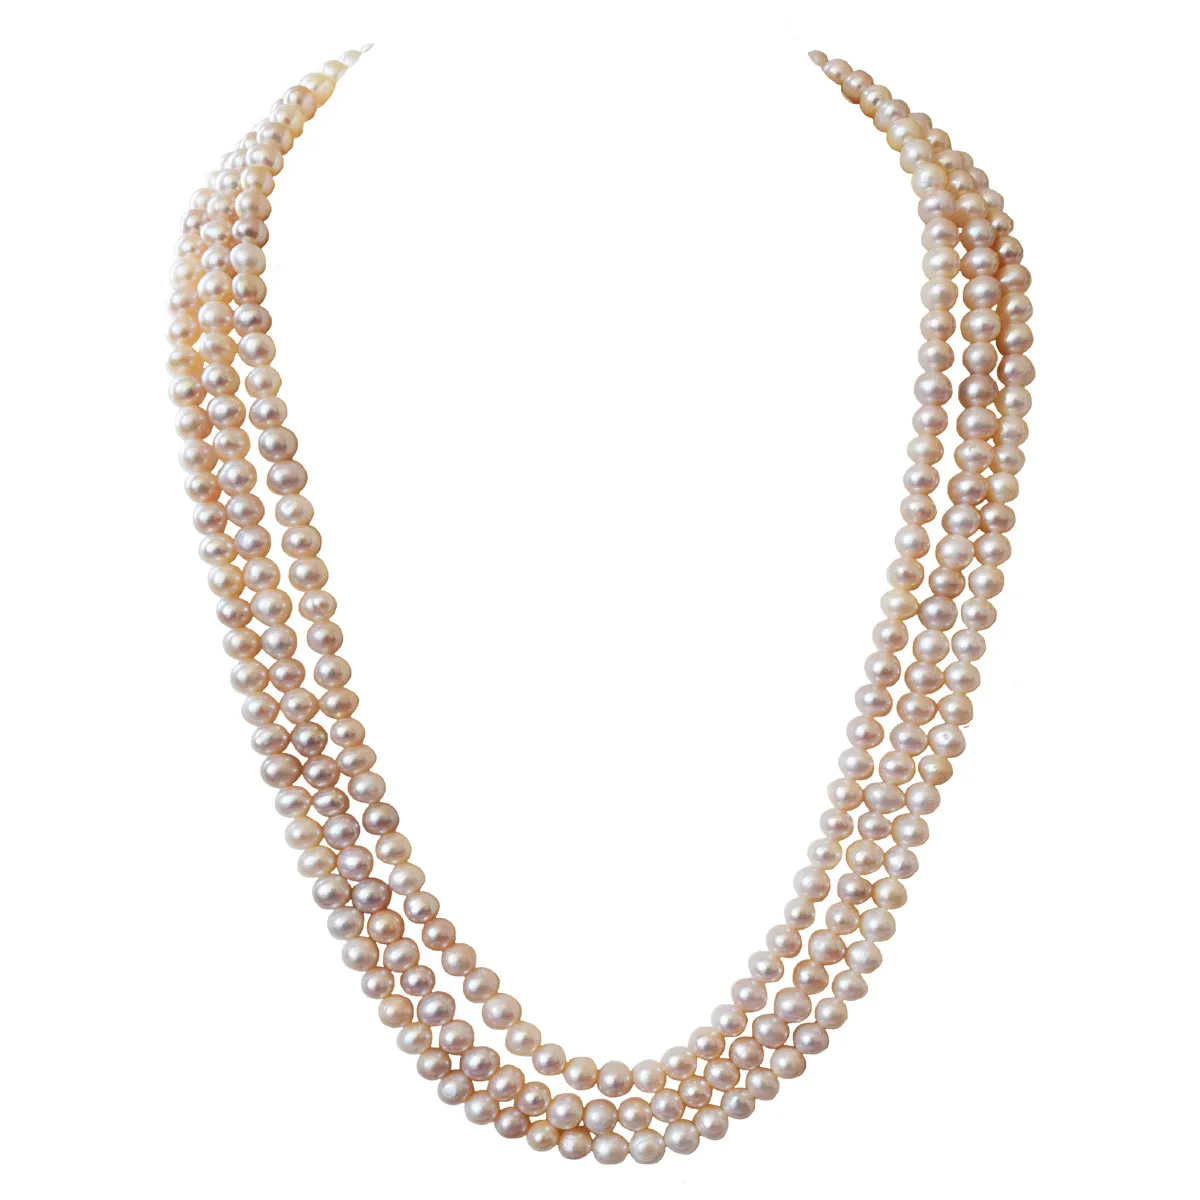 3 Line Real Freshwater Pinkish Pearl Necklace for Women (SN1057)